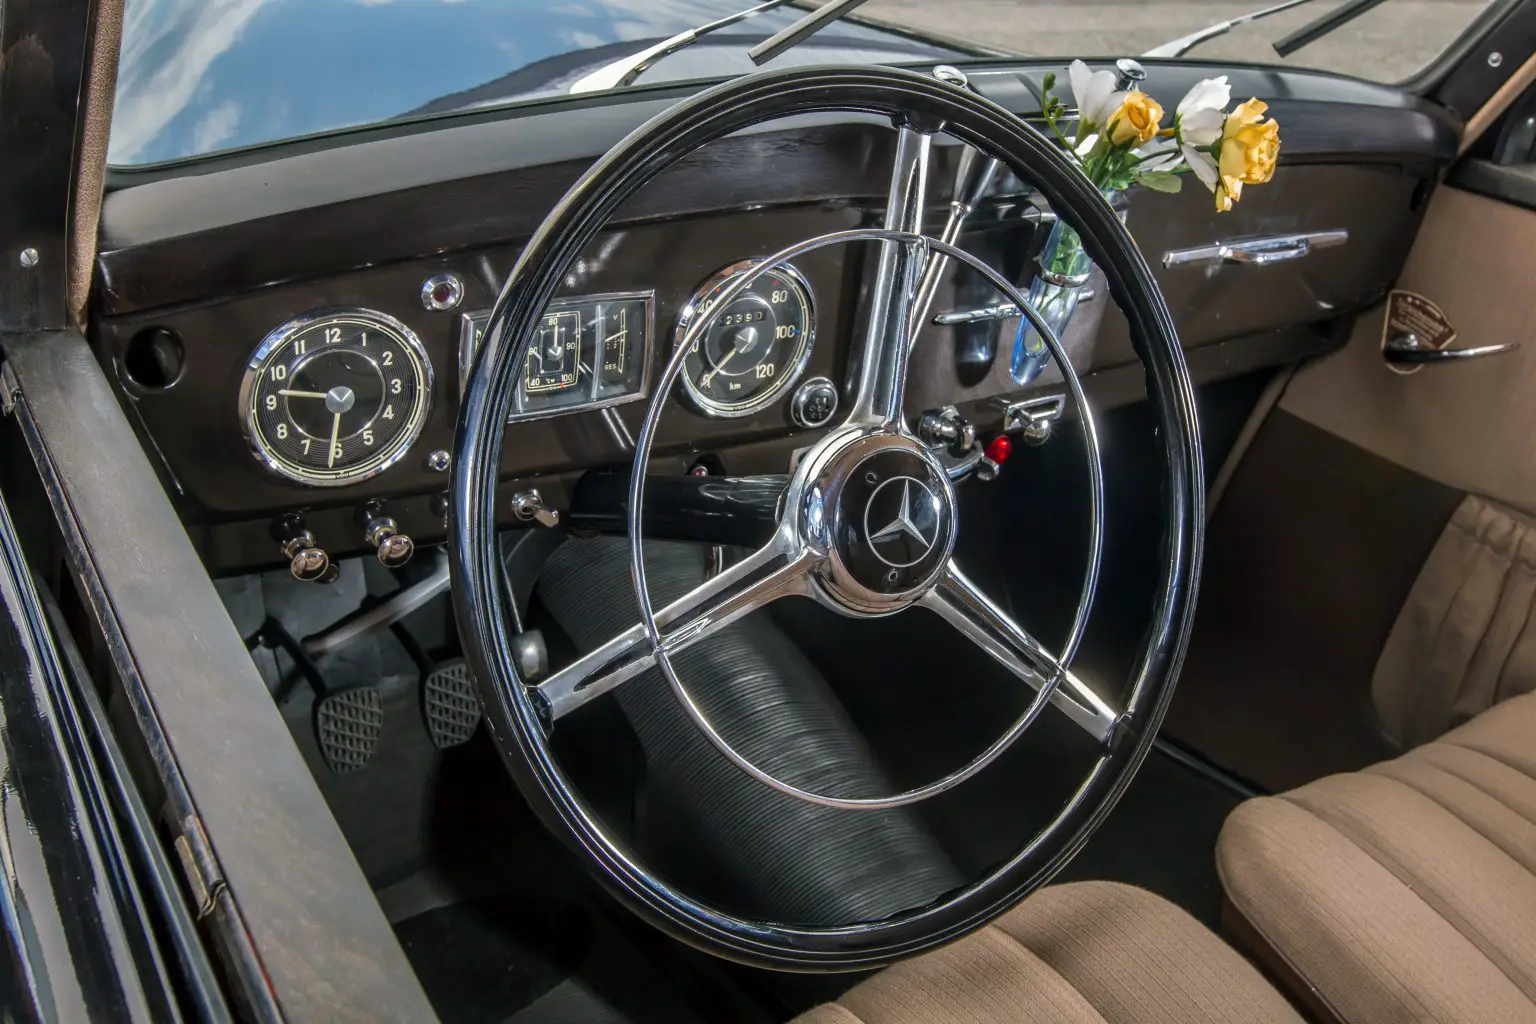 Mercedes-Benz 170 DS W 191 Saloon. Cockpit. Photo from the Mercedes-Benz Classic Insight “History of the E-Class” from 19 to 22 April 2016.